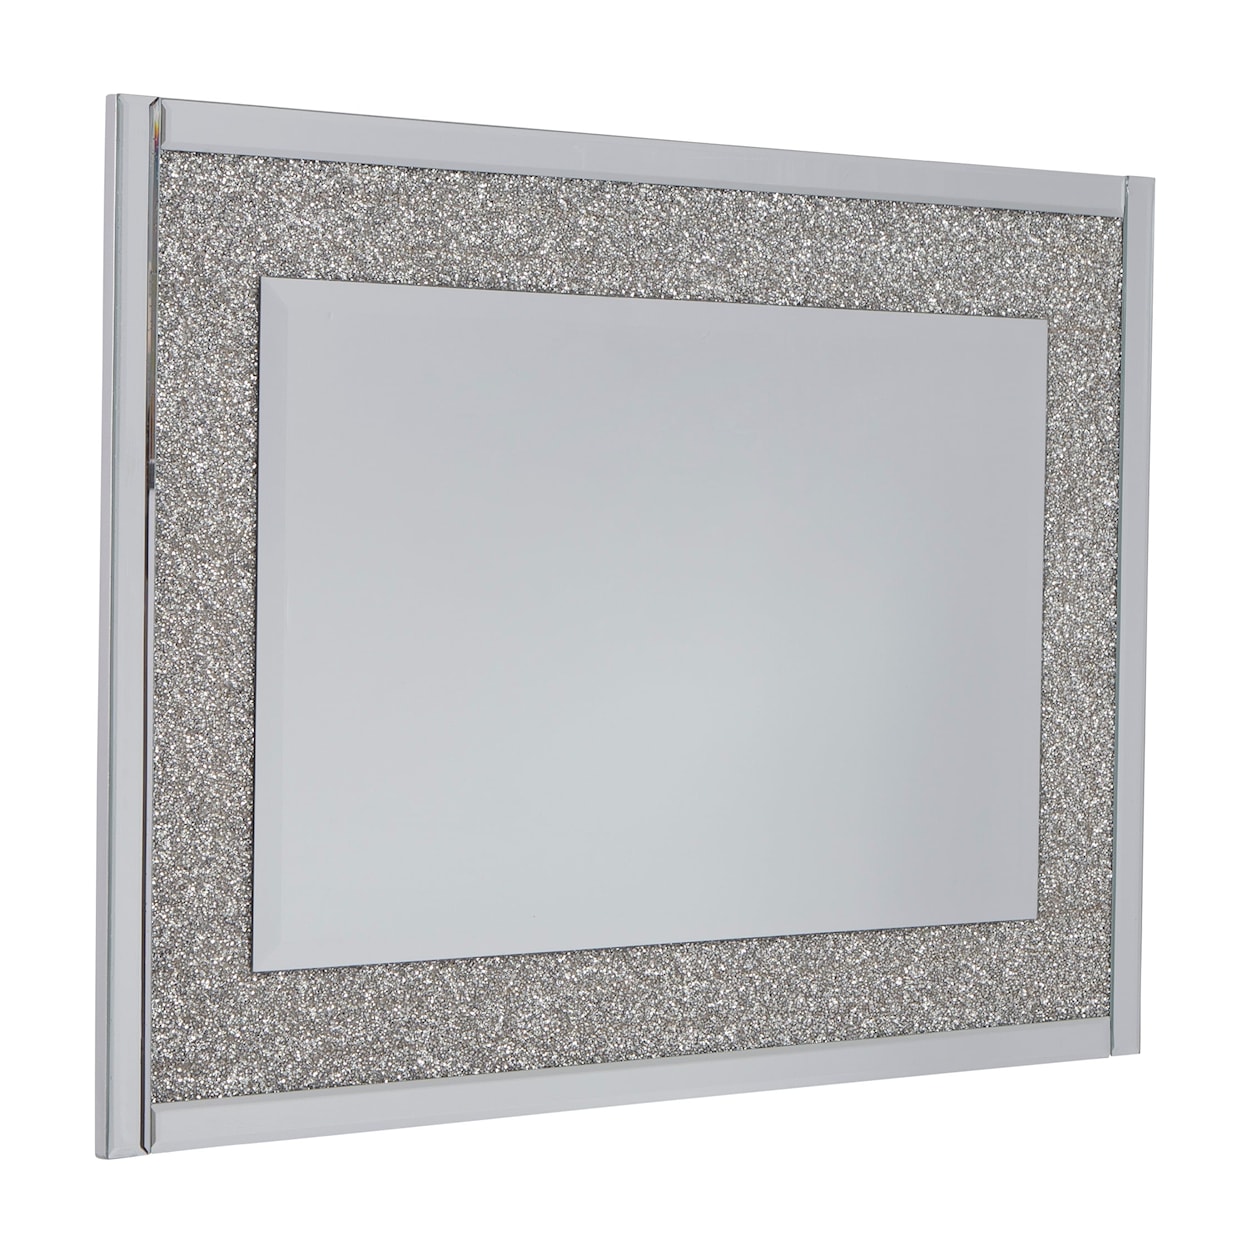 Signature Accent Mirrors Kingsleigh Accent Mirror